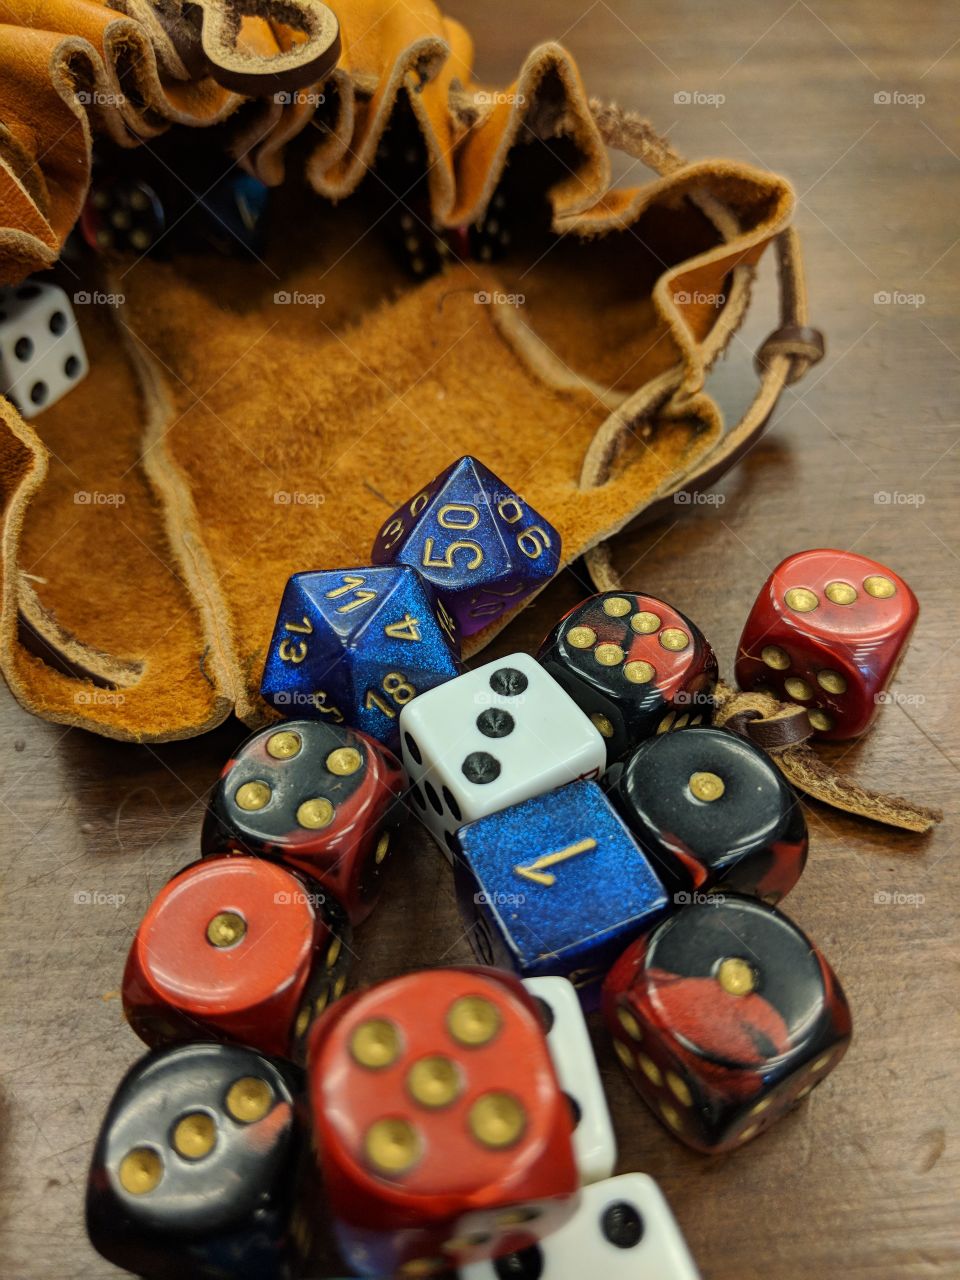 Dice out of a dice bag my aunt gave me.